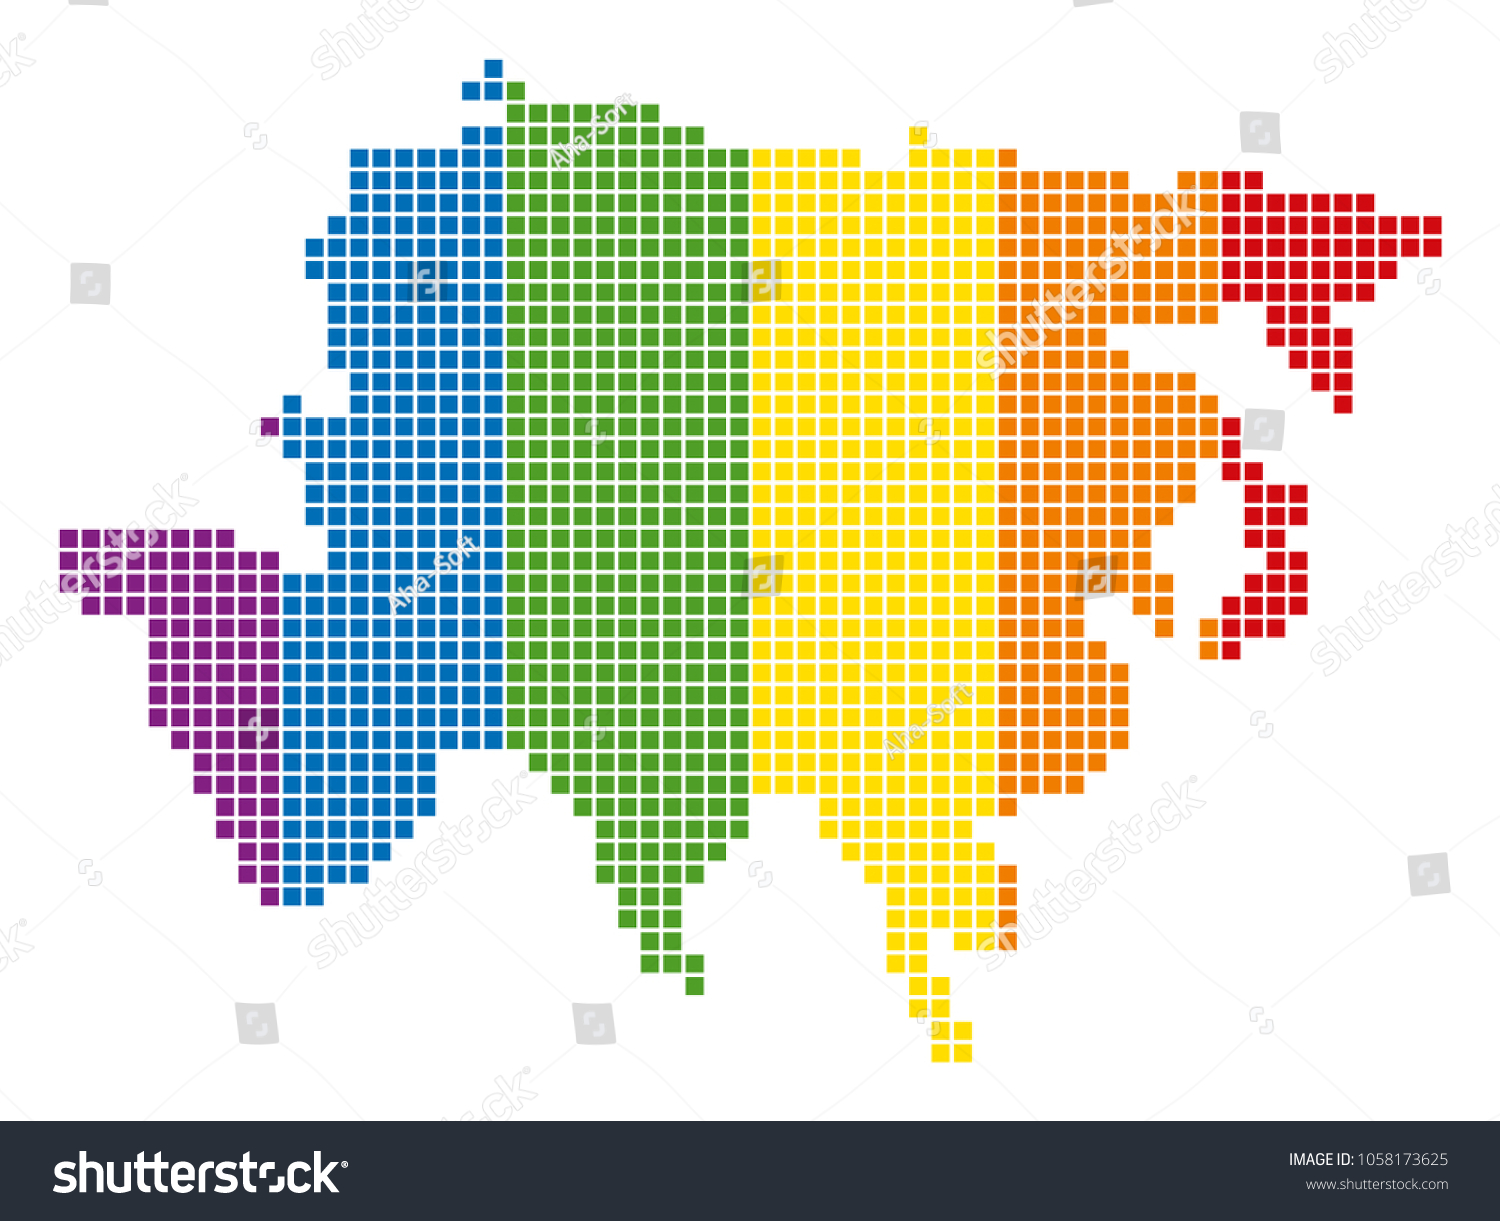 A Dotted Lgbt Asia Map For Lesbians Gays Royalty Free Stock Vector 1058173625 1646